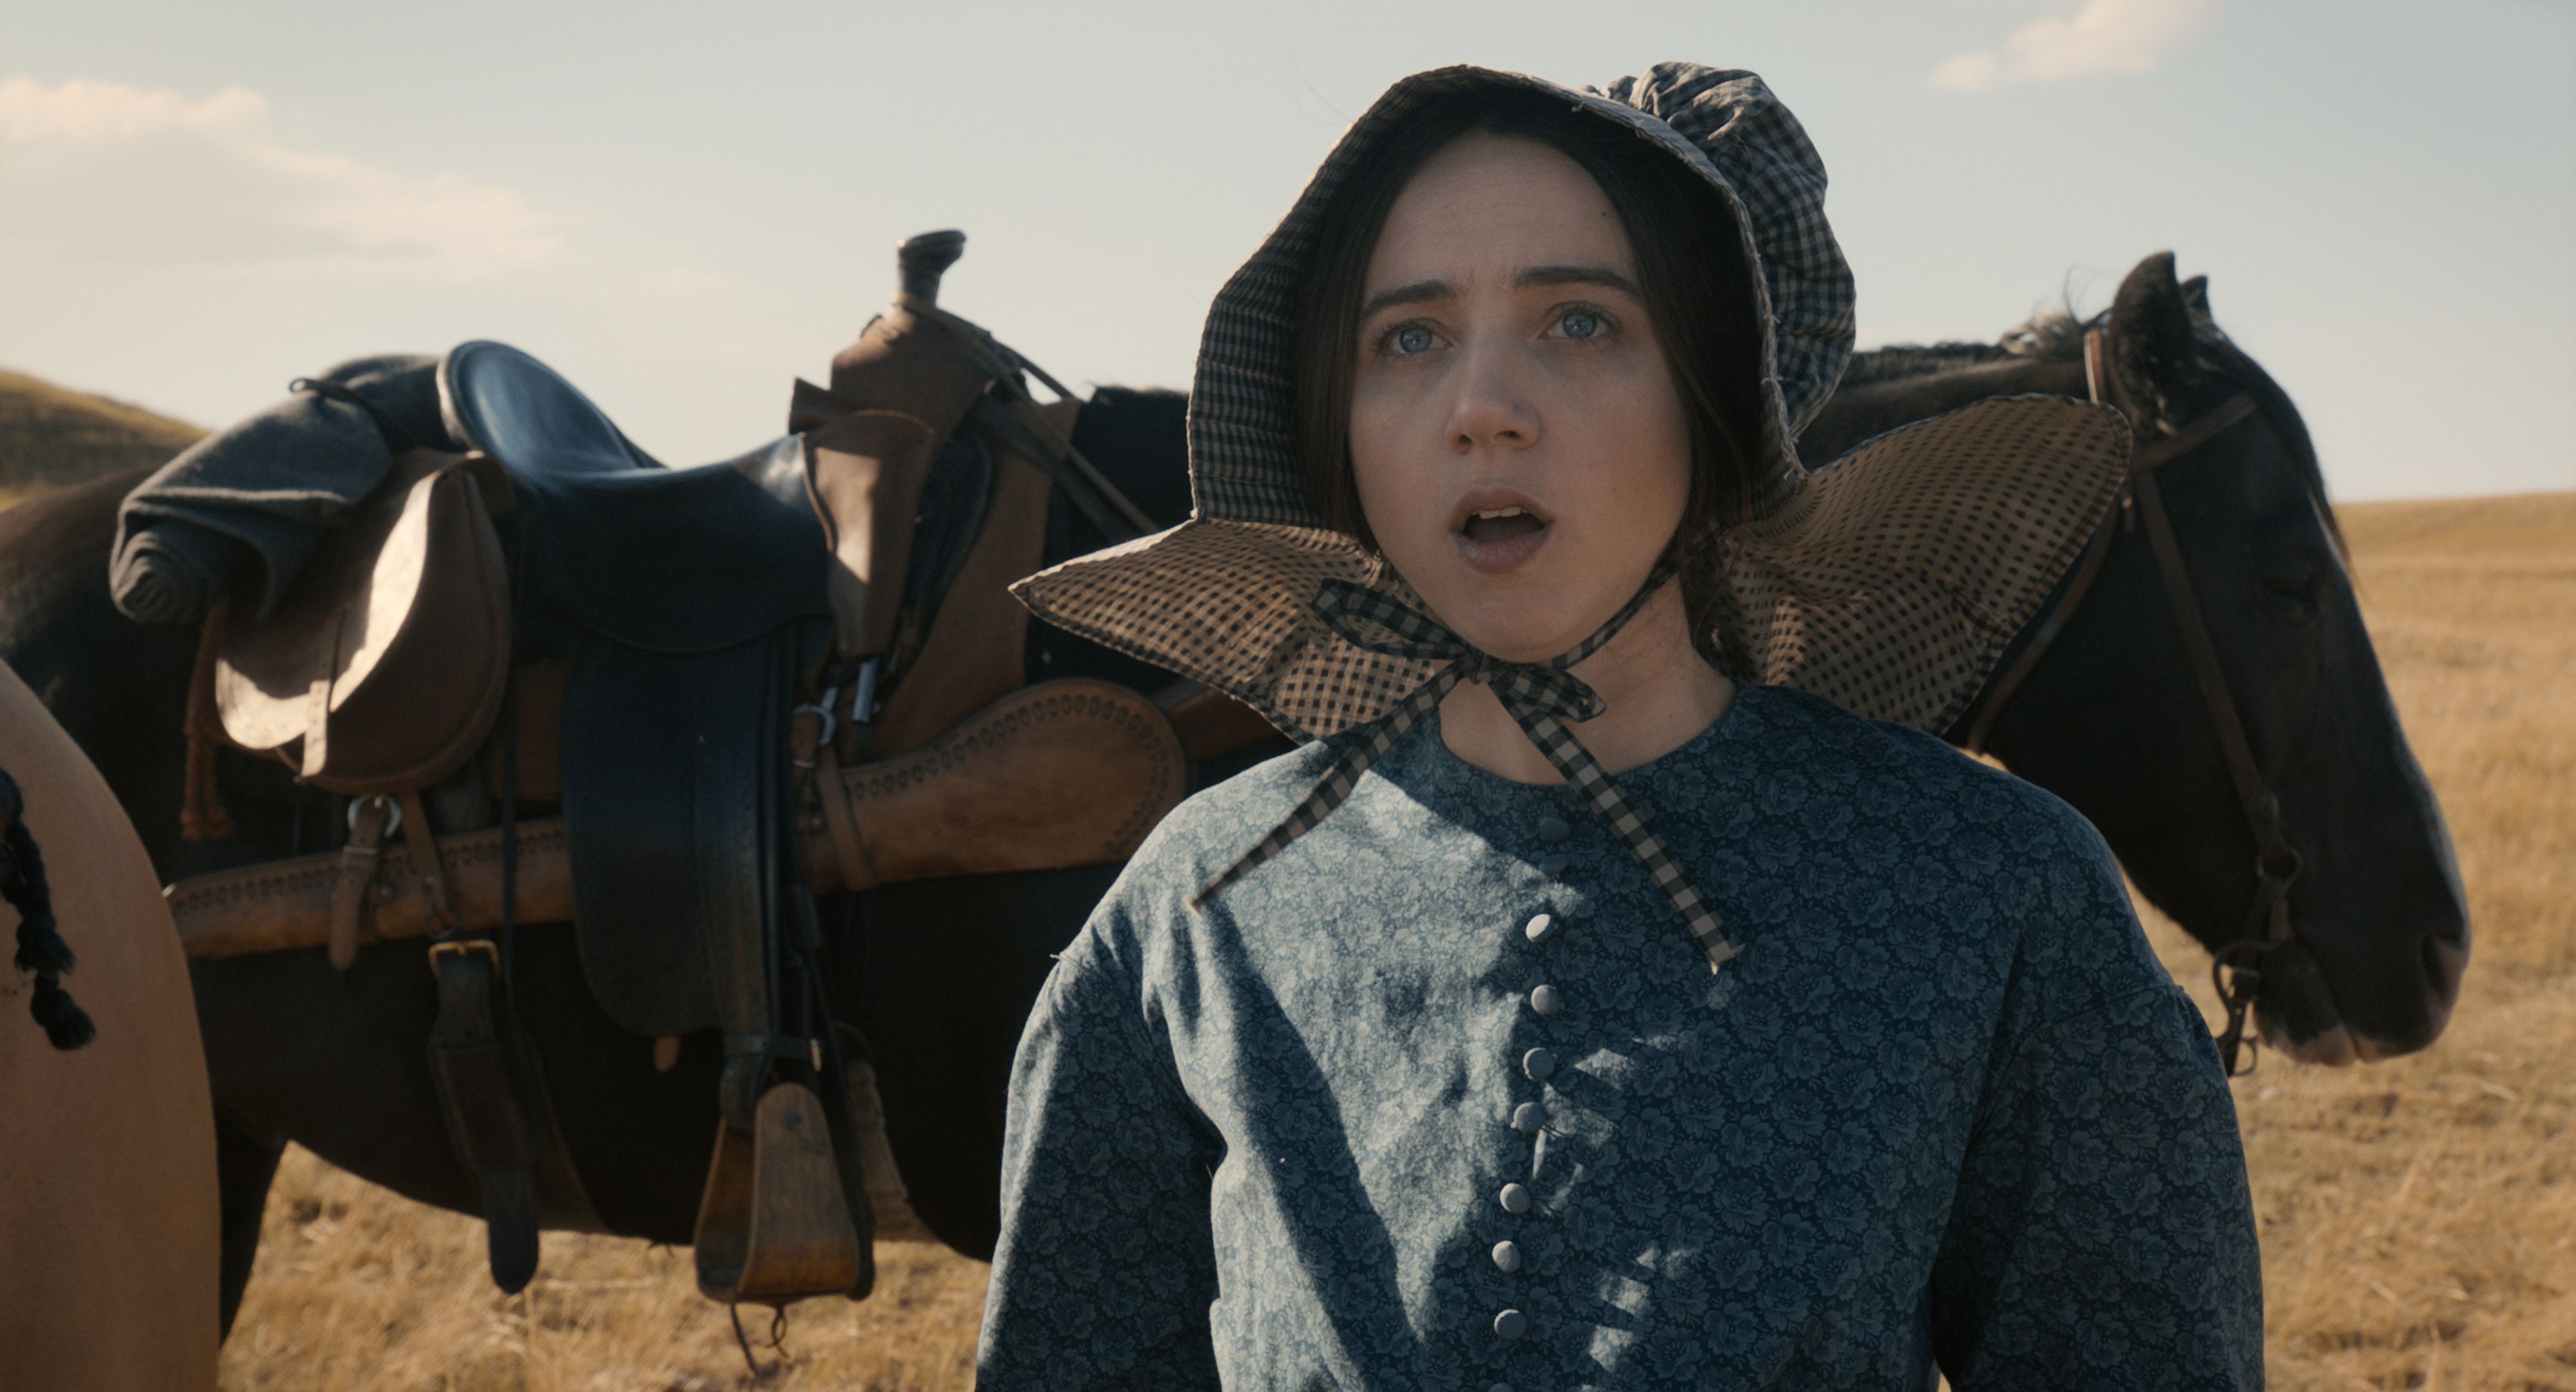 The Ballad of Buster Scruggs: Coen Brothers Push Western